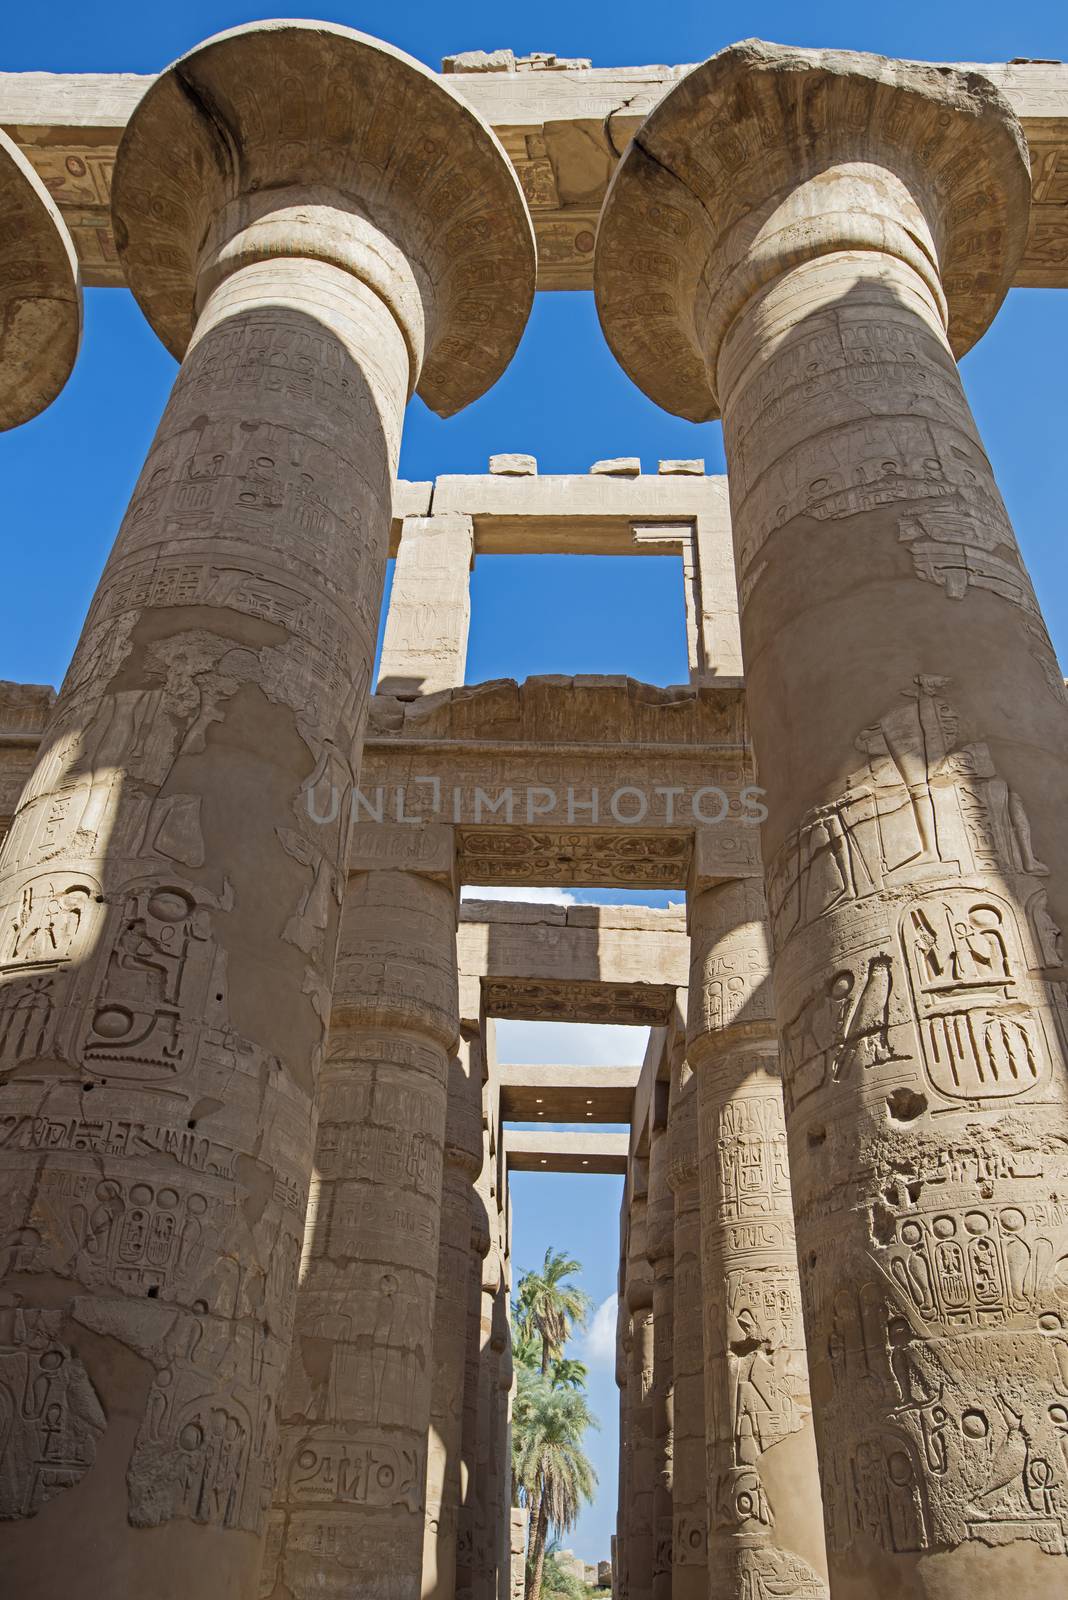 Columns with hieroglyphic carvings and paintings in hypostyle hall at anciant egyptian Karnak Temple in Luxor